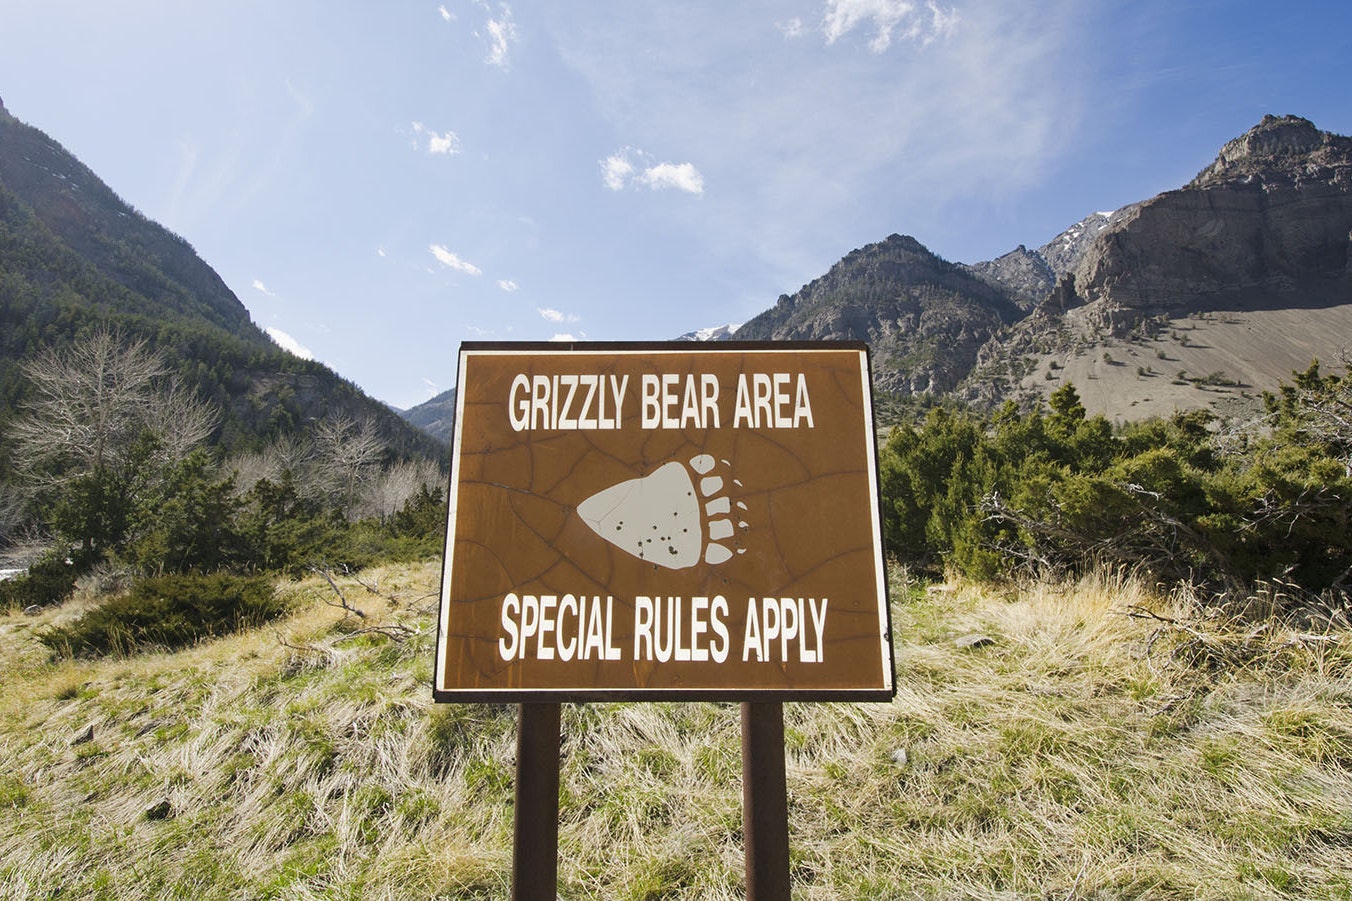 Grizzly area 5 24 23